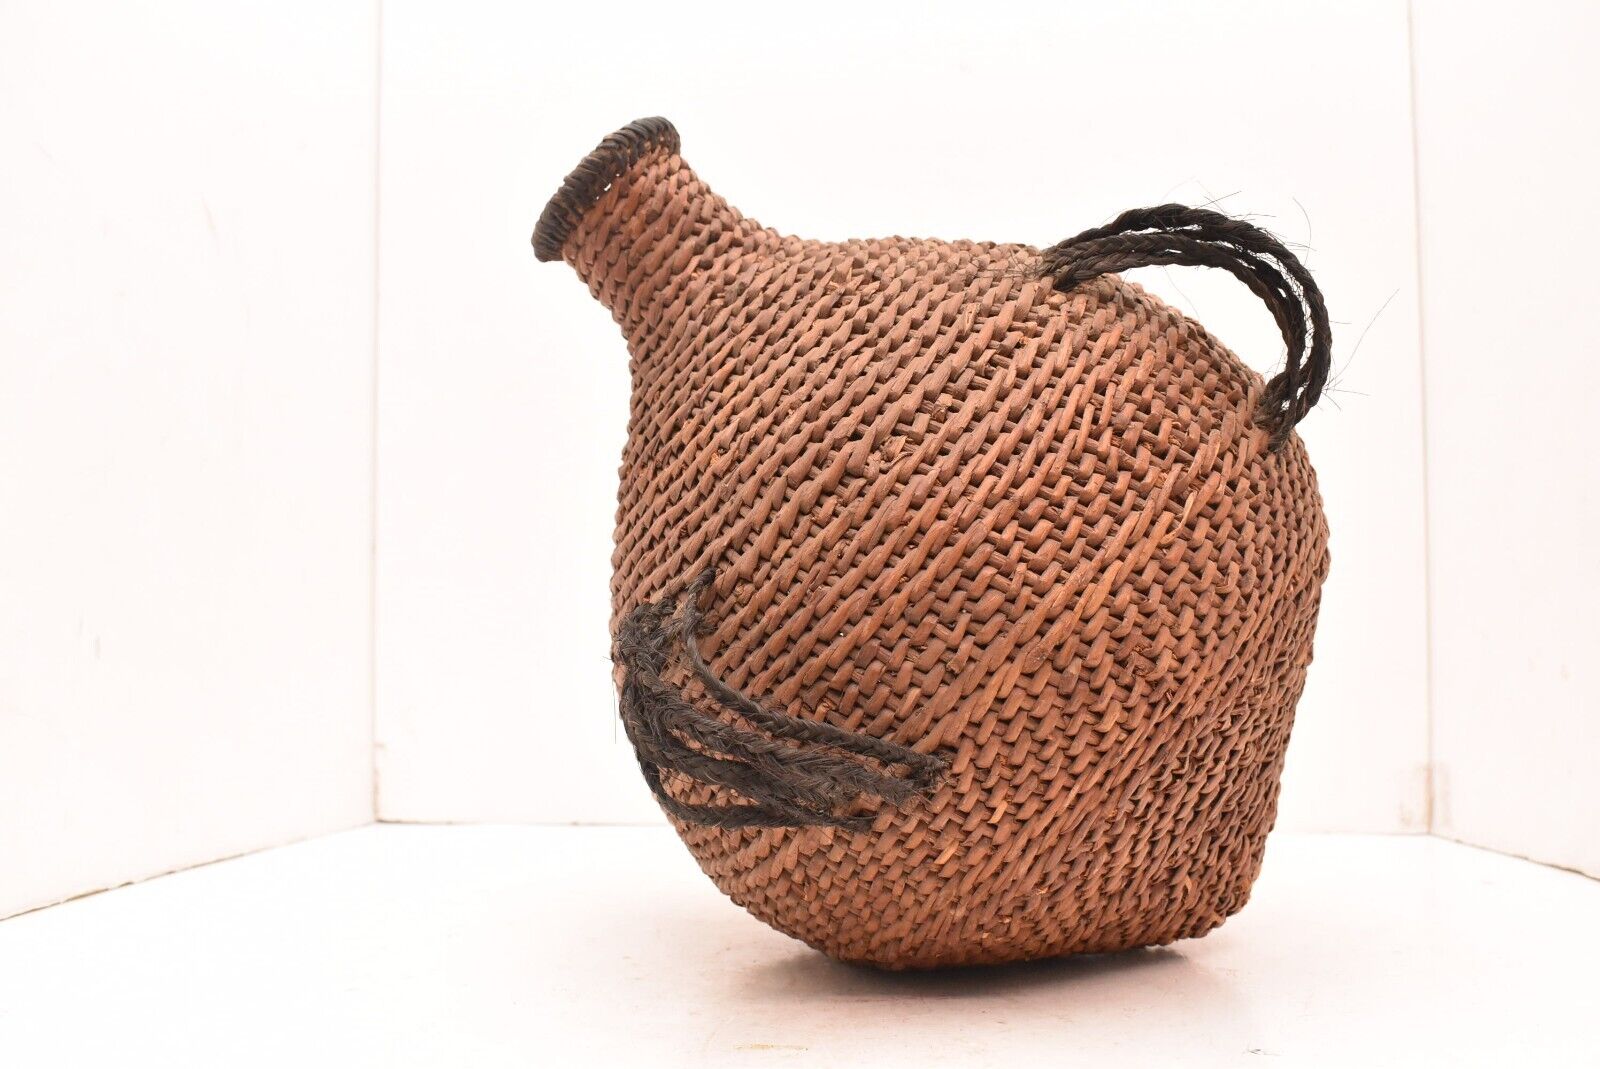 Antique 1800s Paiute Native American Indian Seed Carrier Basket Jug VTG Woven.